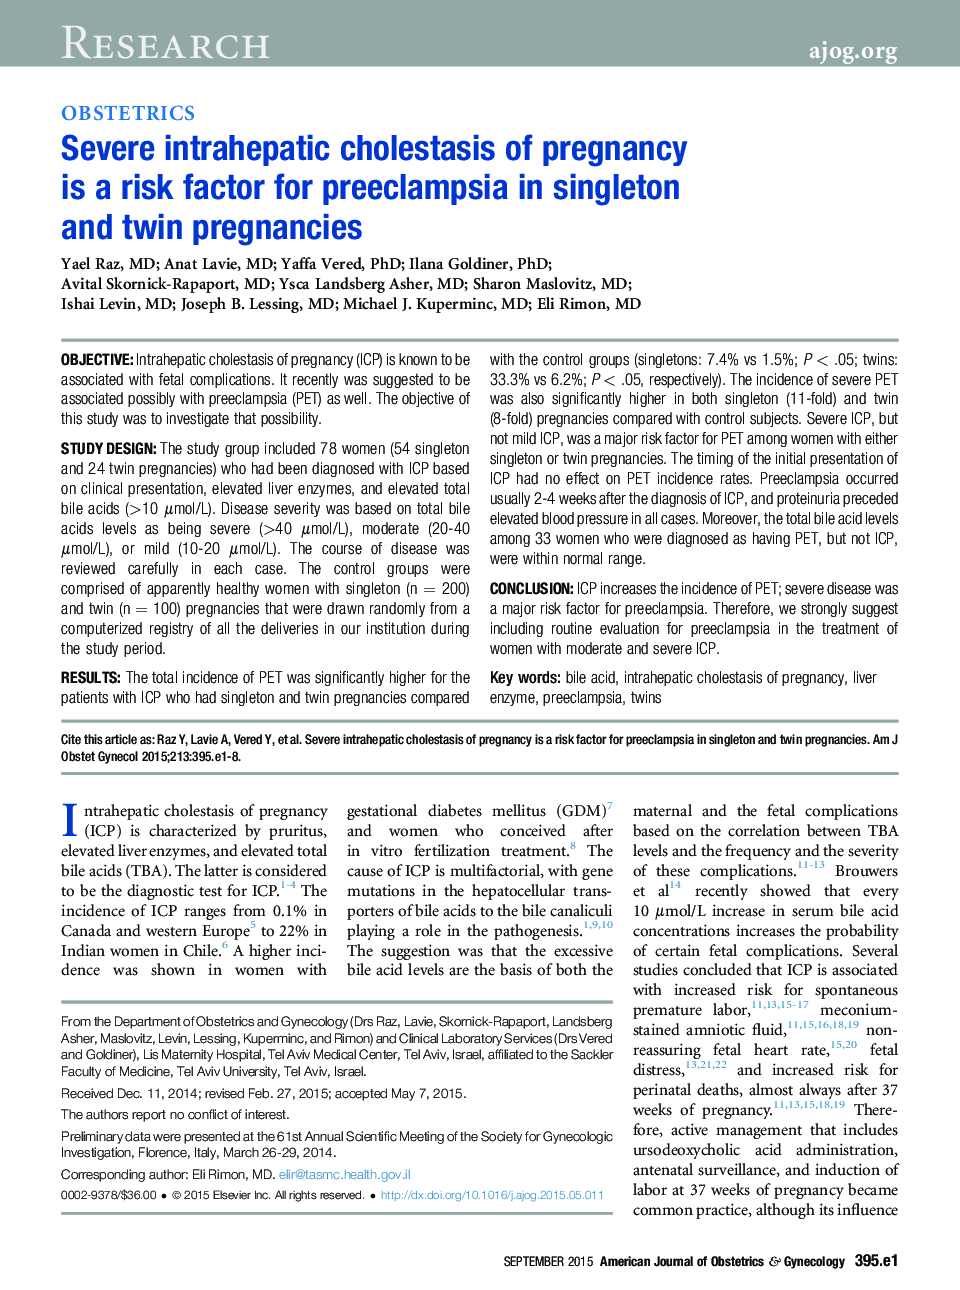 Severe intrahepatic cholestasis of pregnancy is a risk factor for preeclampsia in singleton and twin pregnancies